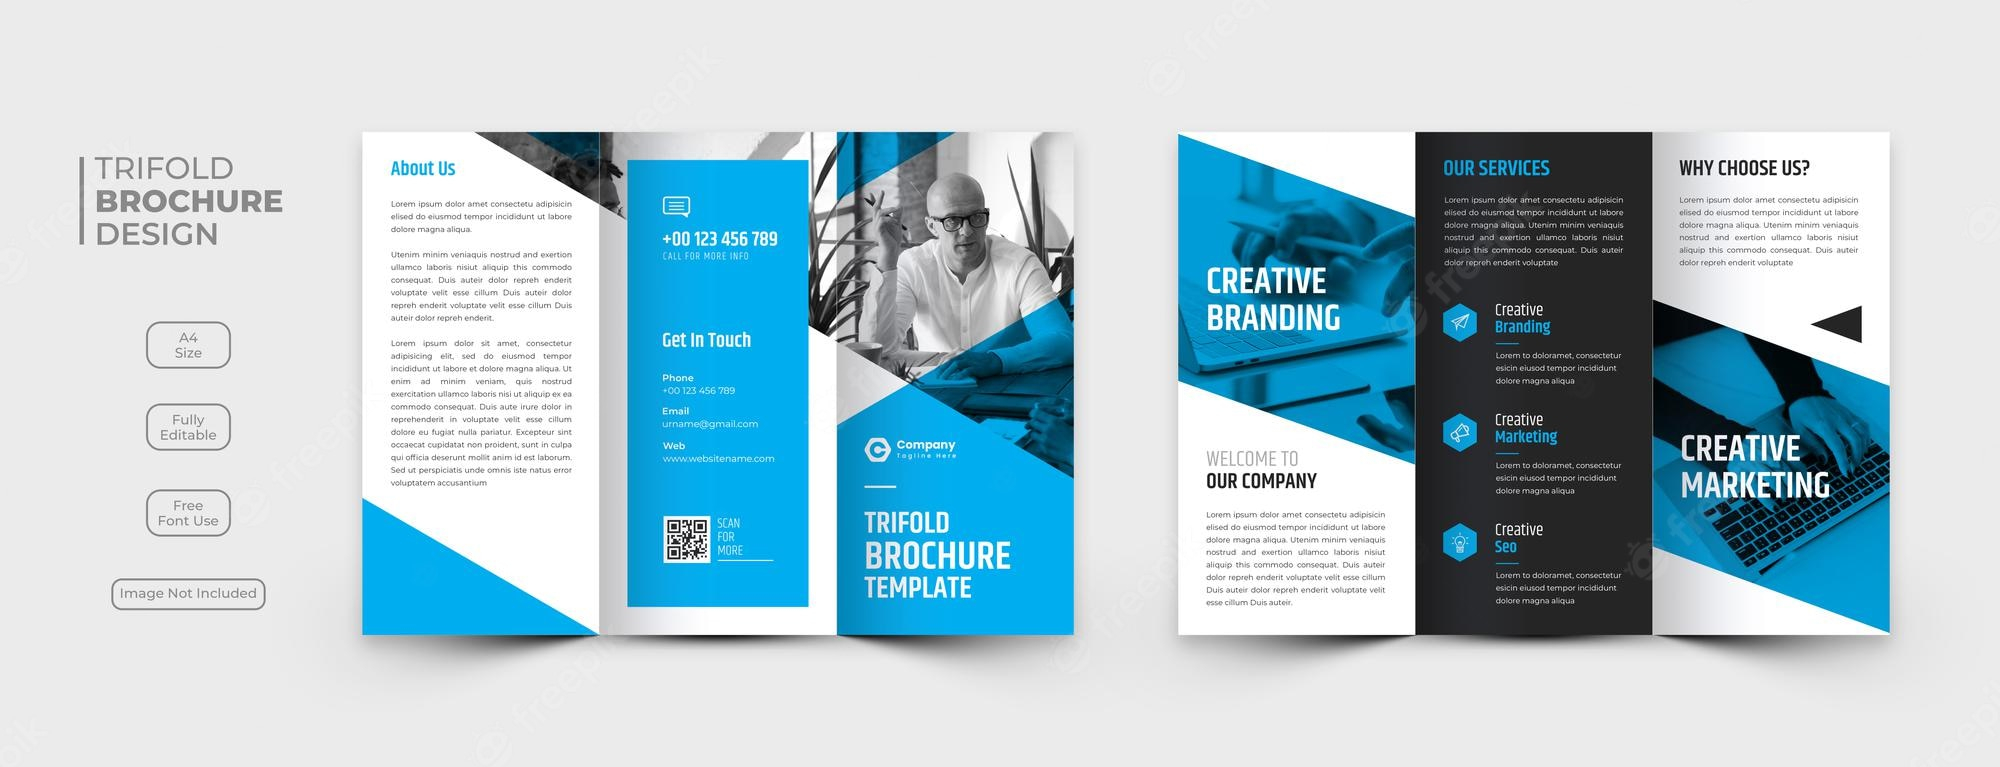 Brochure Images - Free Download on Freepik Within Free Brochure Template Downloads